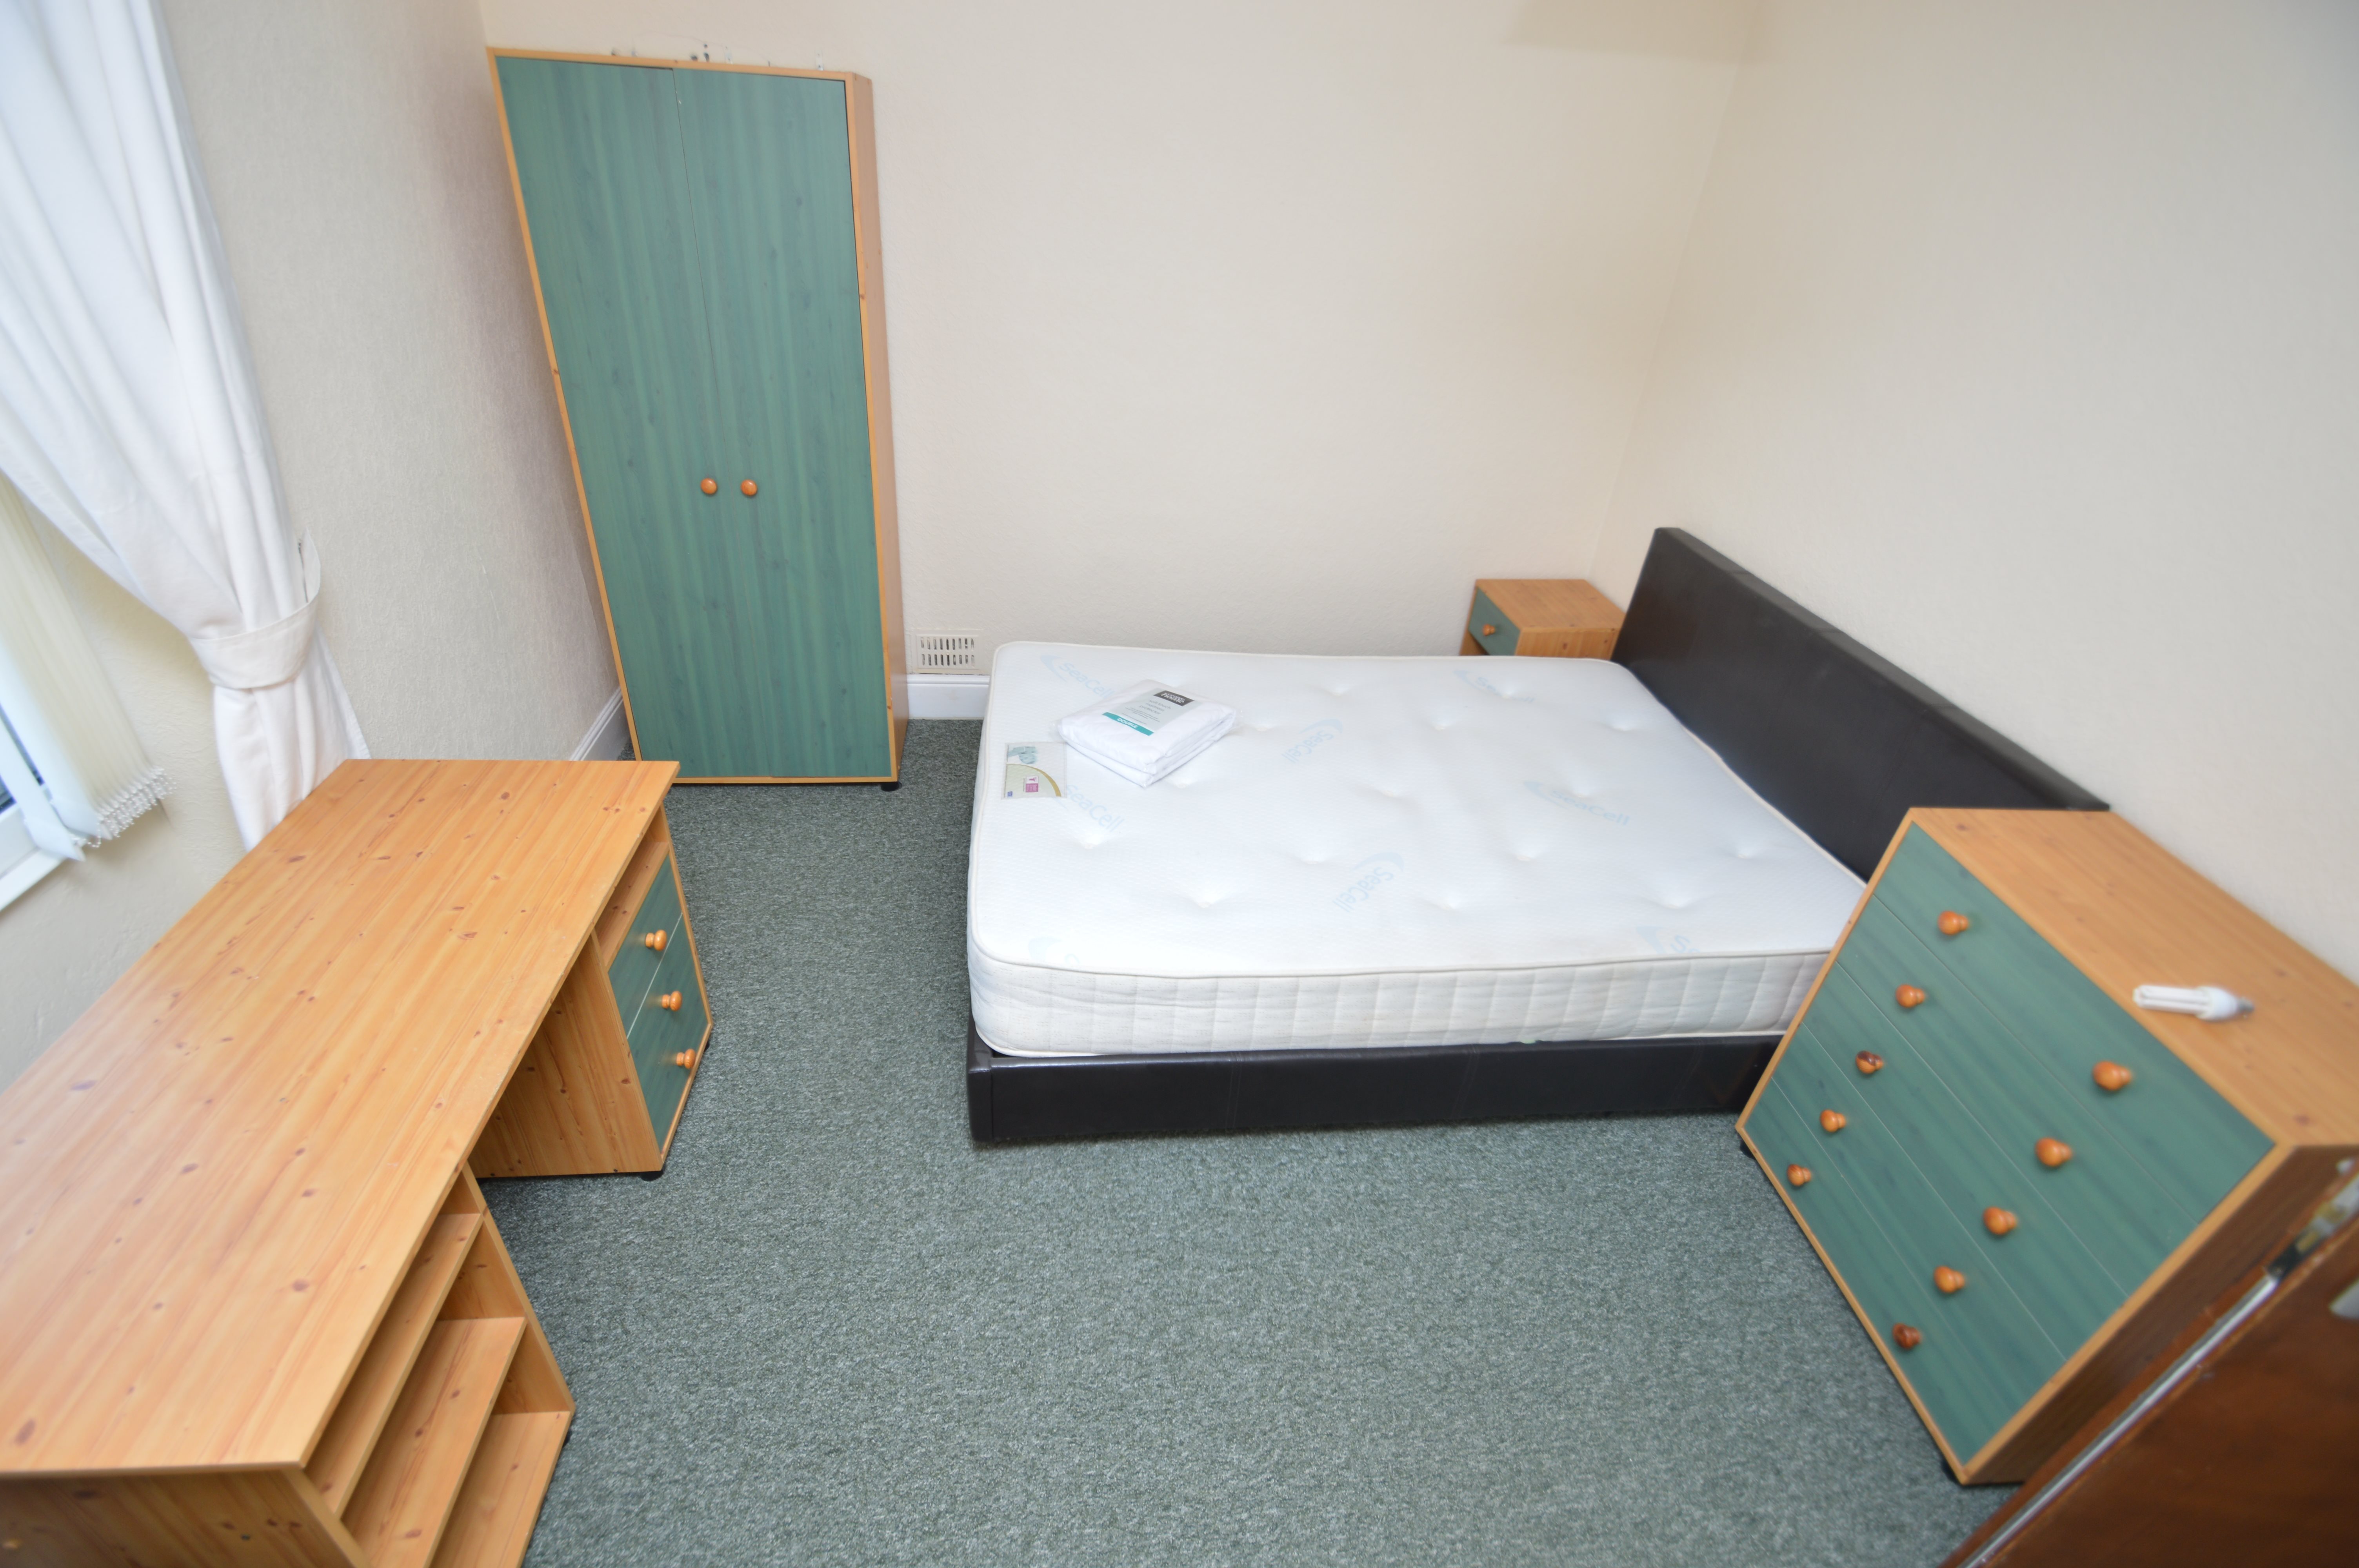 1 bed house / flat share to rent in Wood Road , Treforest  0